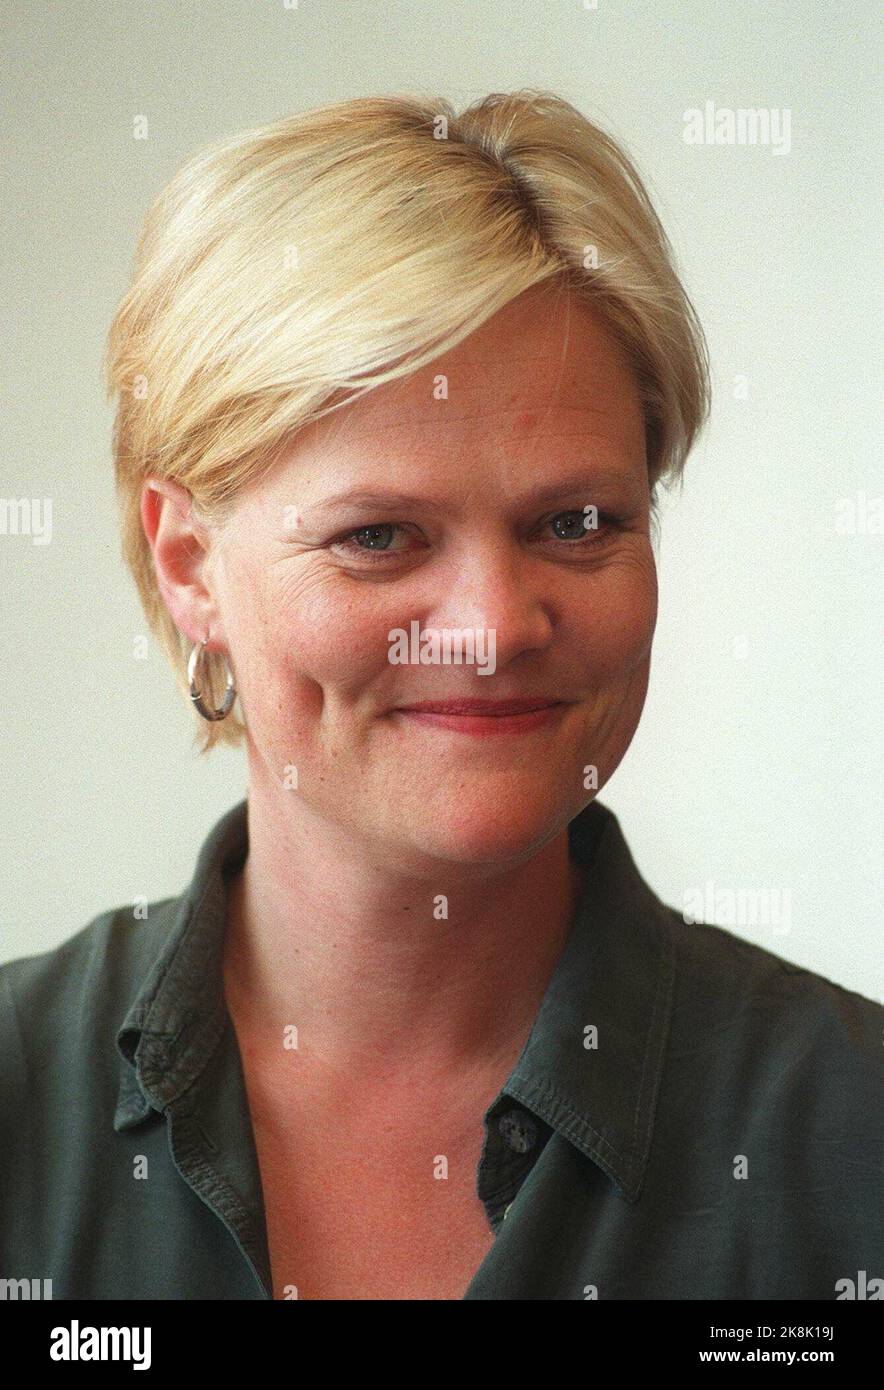 Oslo 199705. Kristin Halvorsen is among the Socialist Left Party Storting candidates before the parliamentary elections in the fall of 1997. Photo Helge Hansen / Tomm W. Christiansen / NTB / NTB Stock Photo